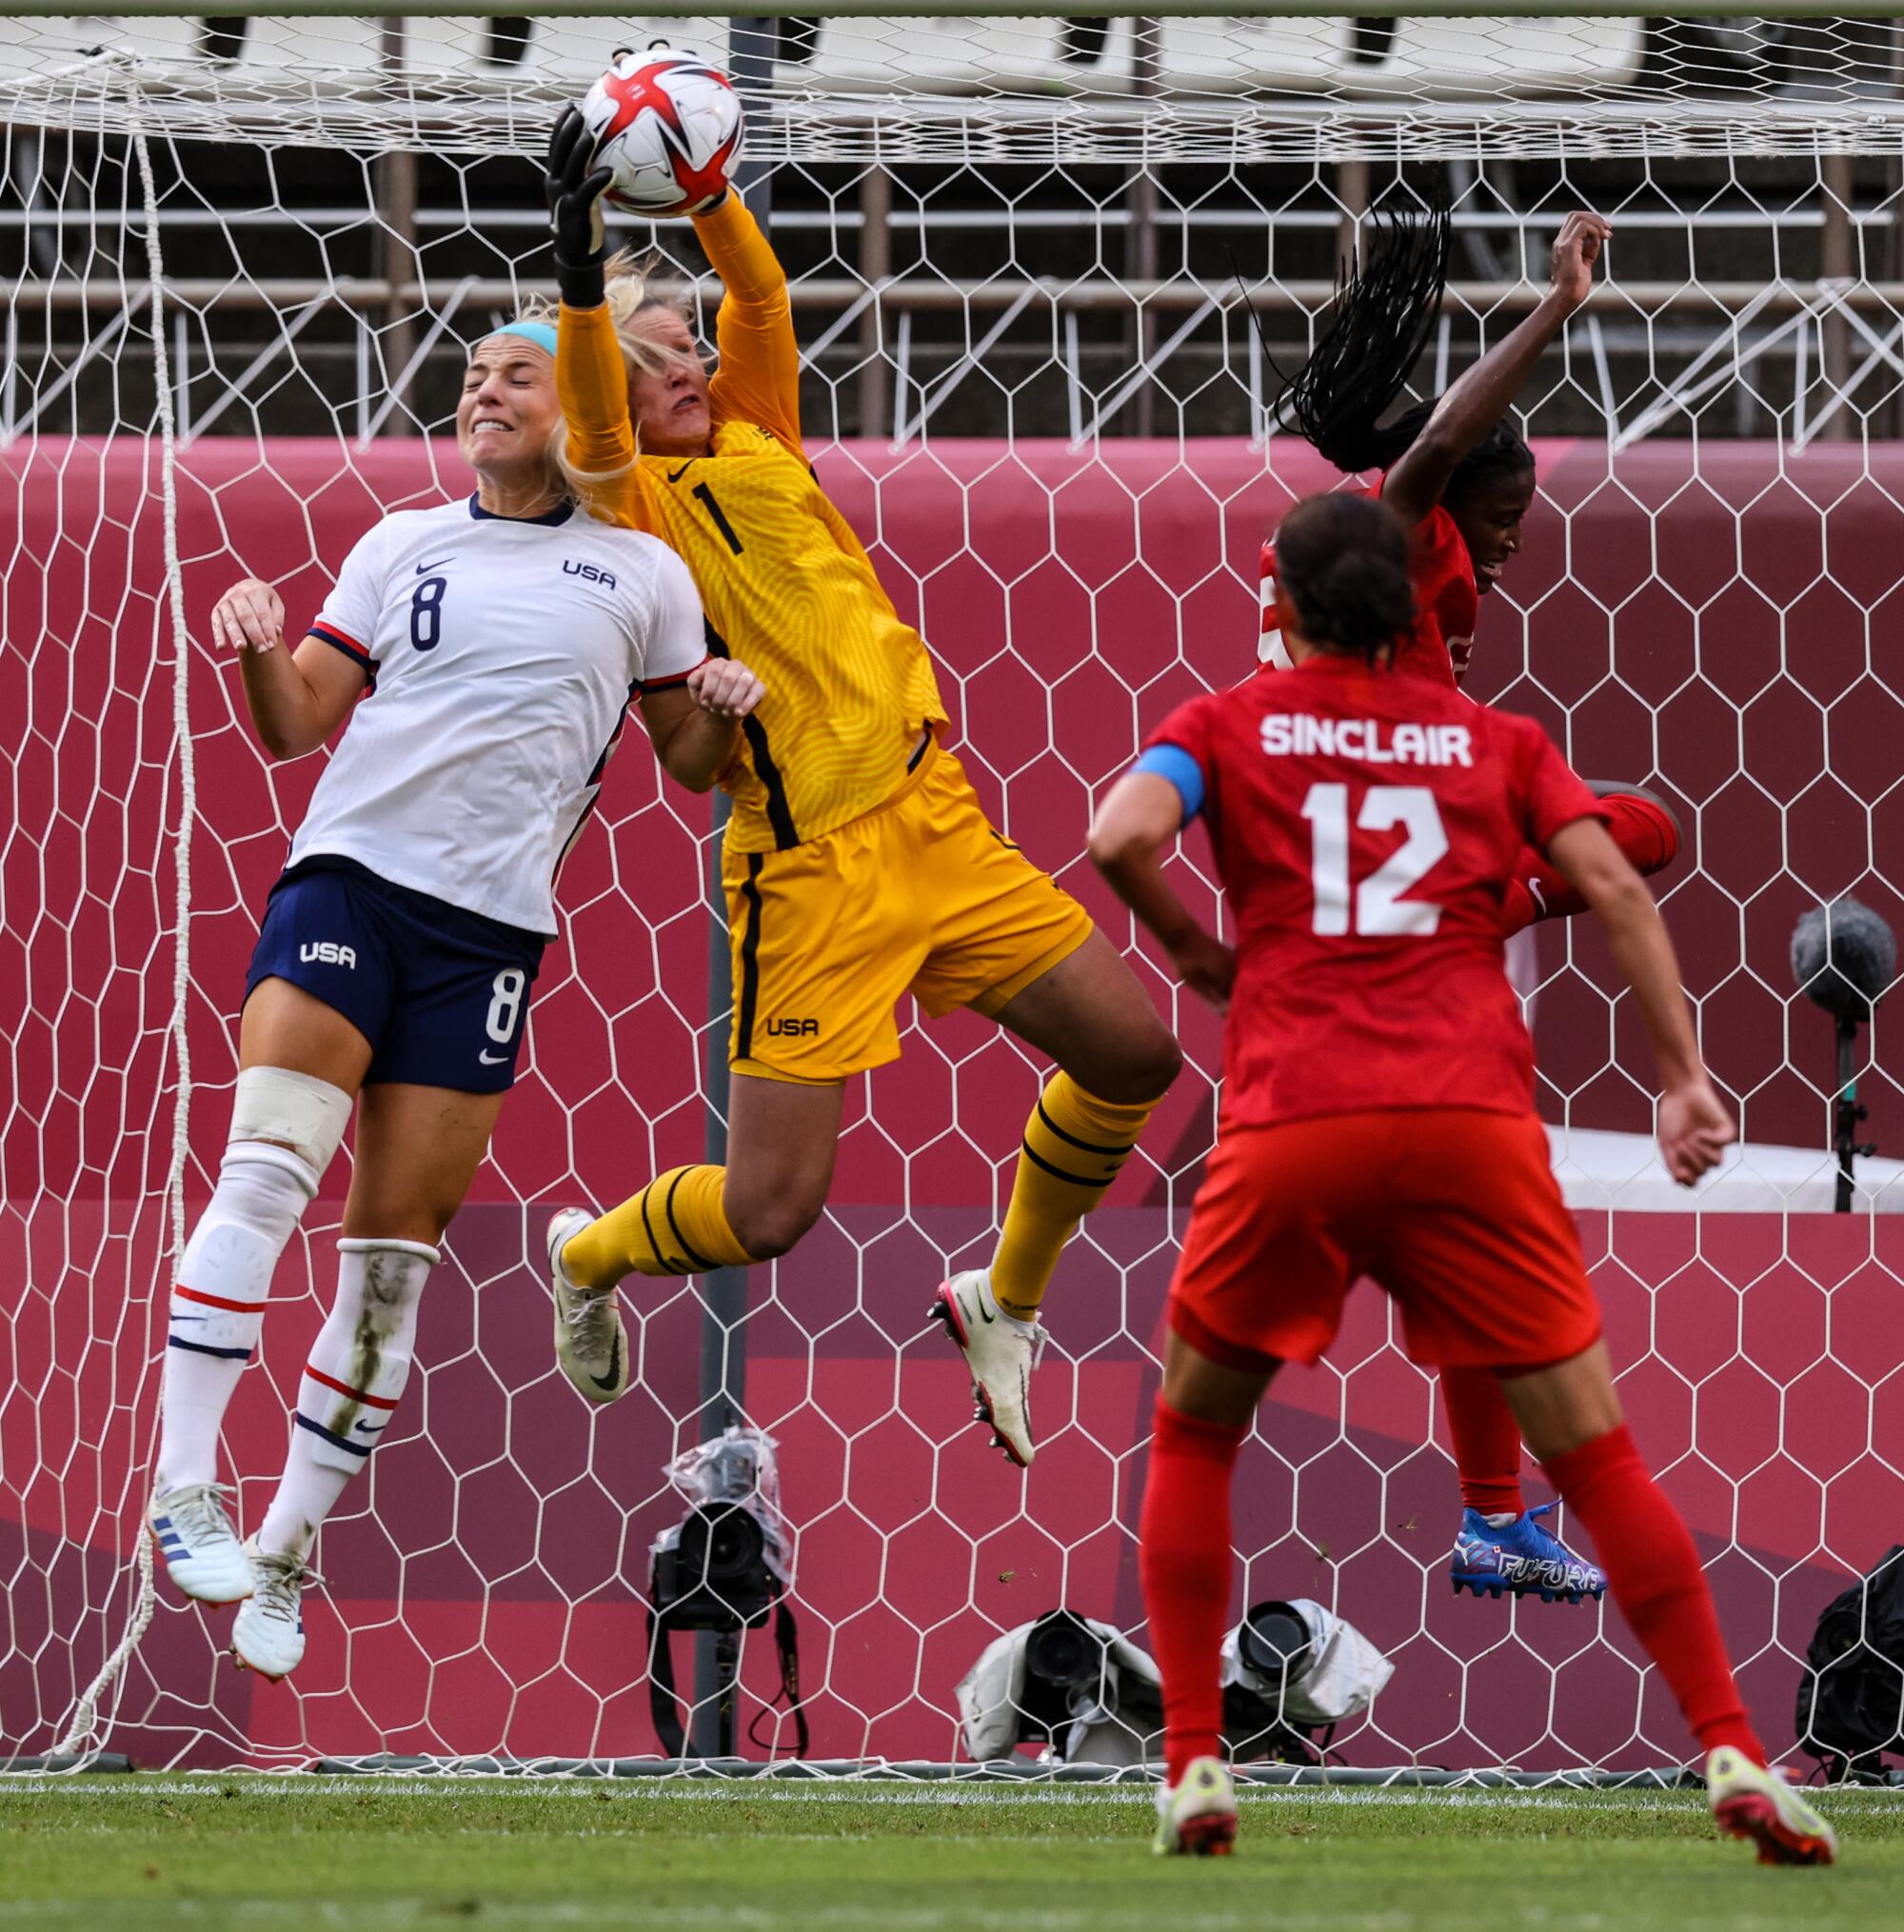 USA goalkeeper Alyssa Naeher collides with Julie Ertz as they prevent a goal during the semifinal in women's soccer.